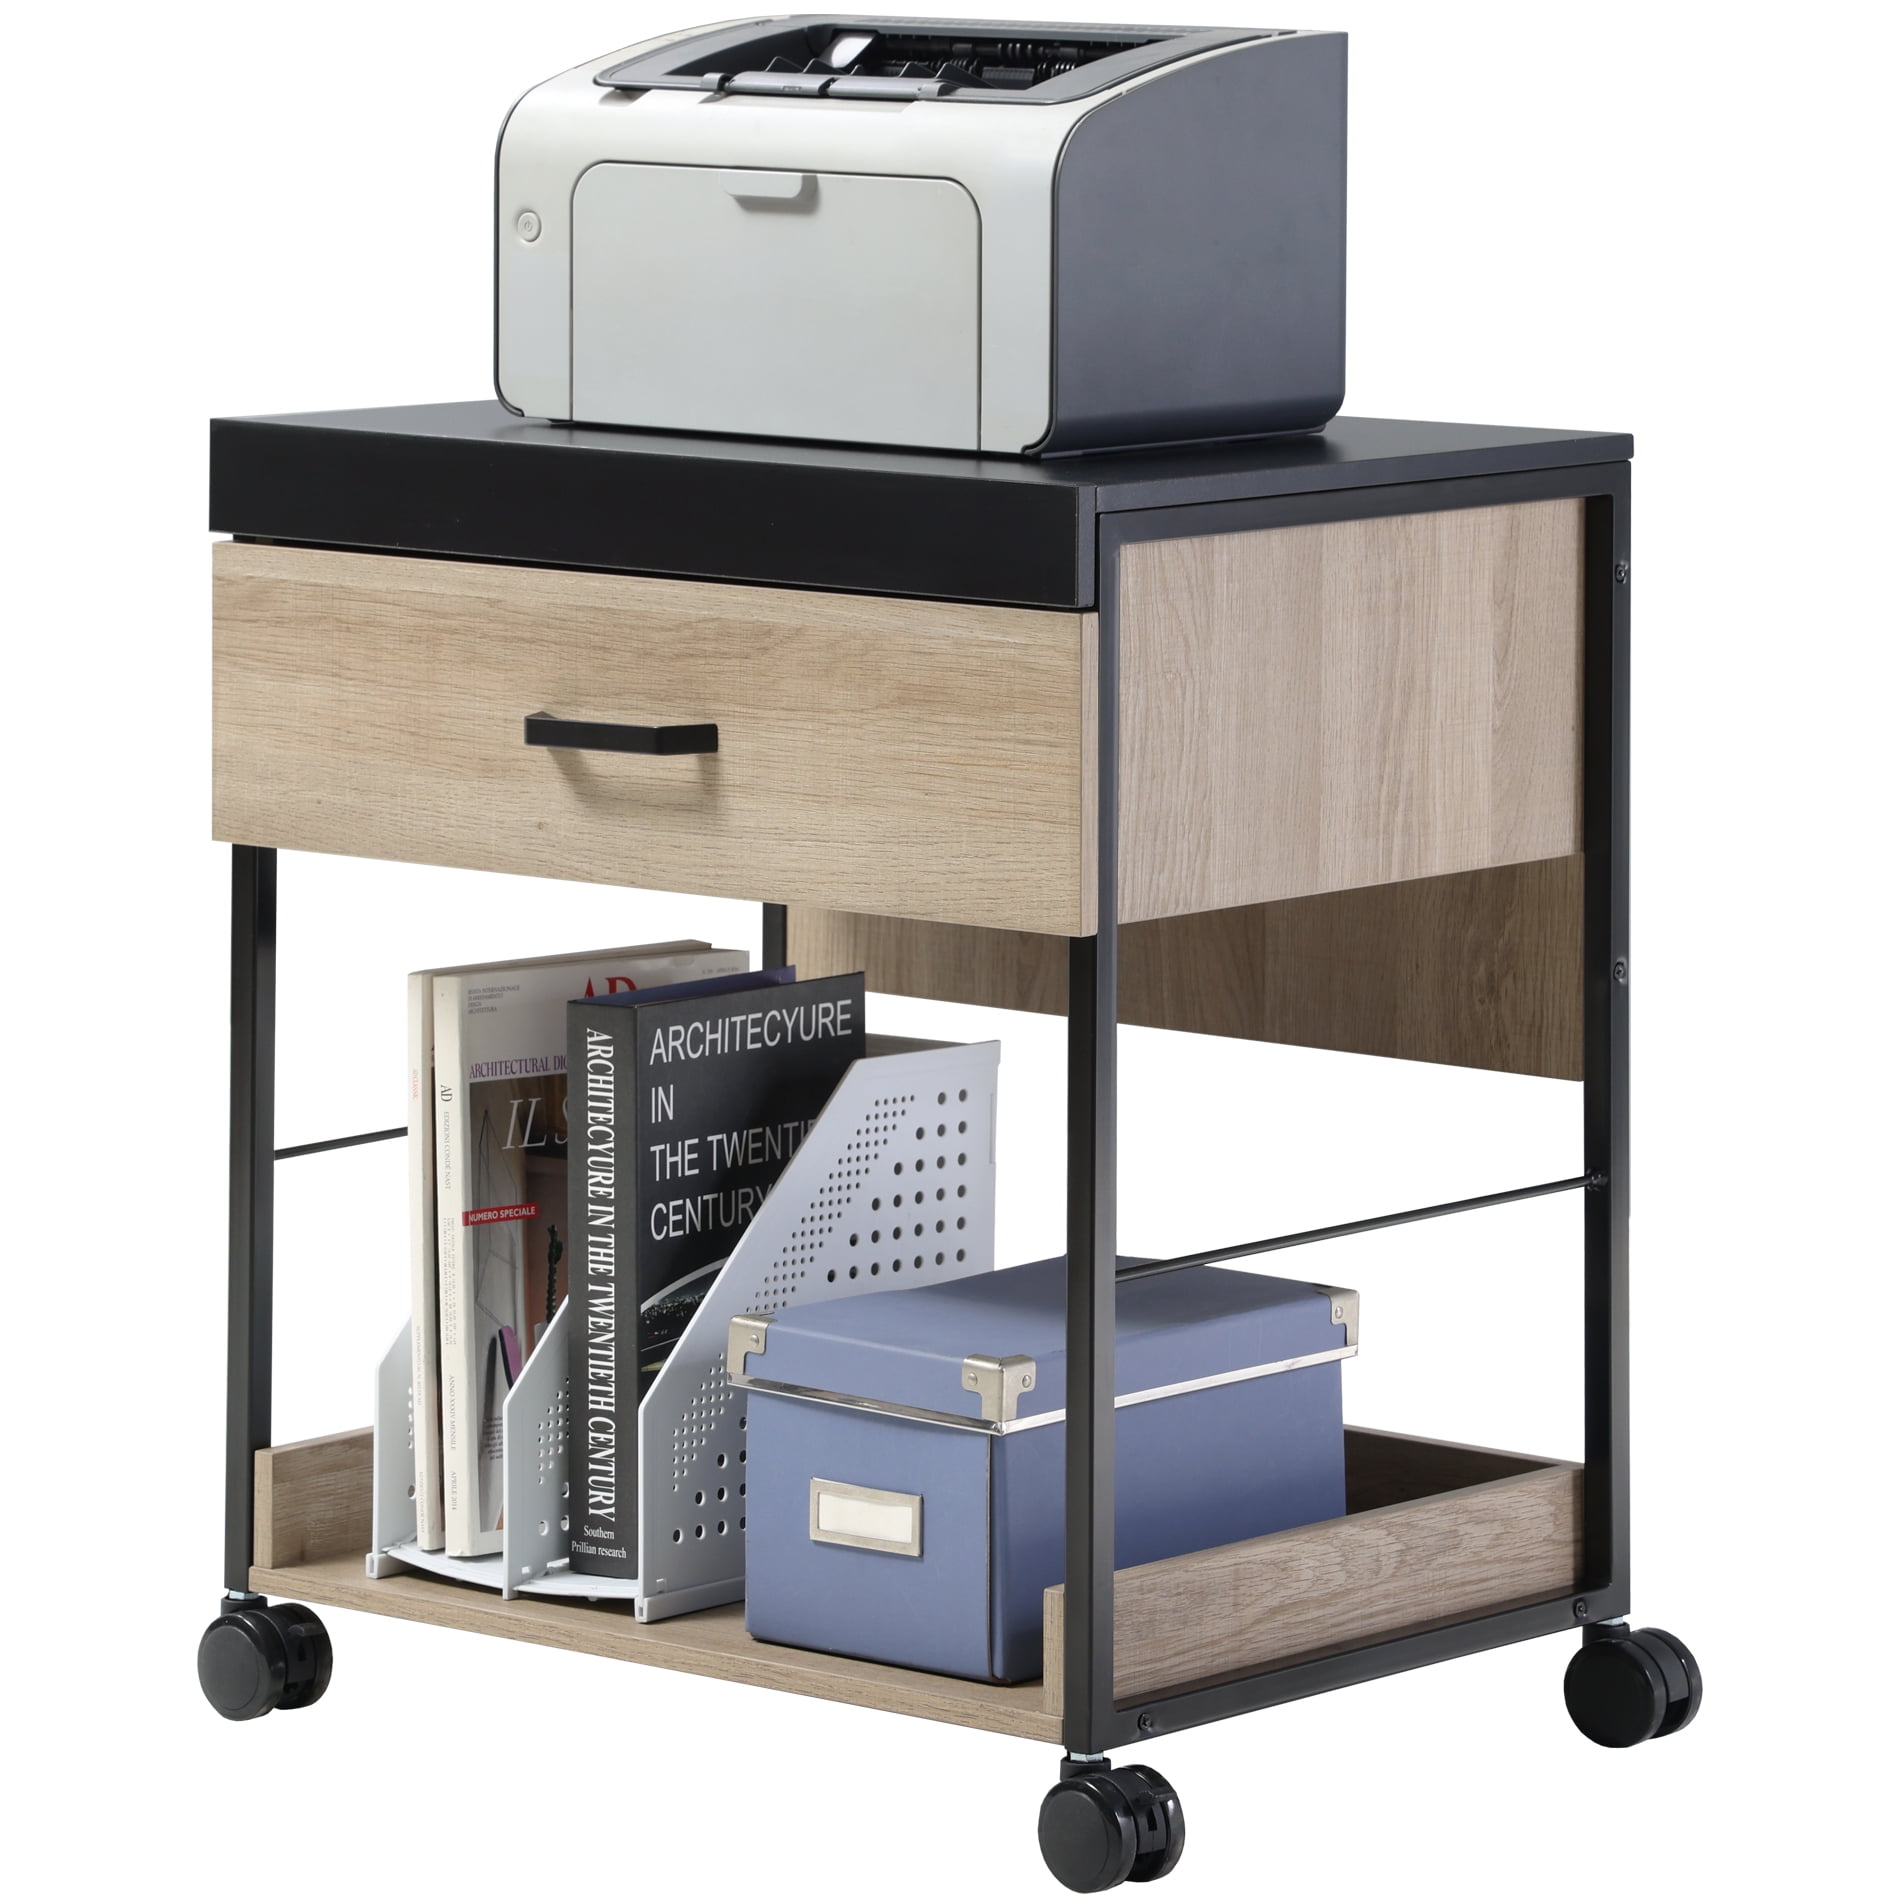 HOMOOI Mobile Filing Cabinet, Printer Stand on Wheels with Drawer, H03E2050Q